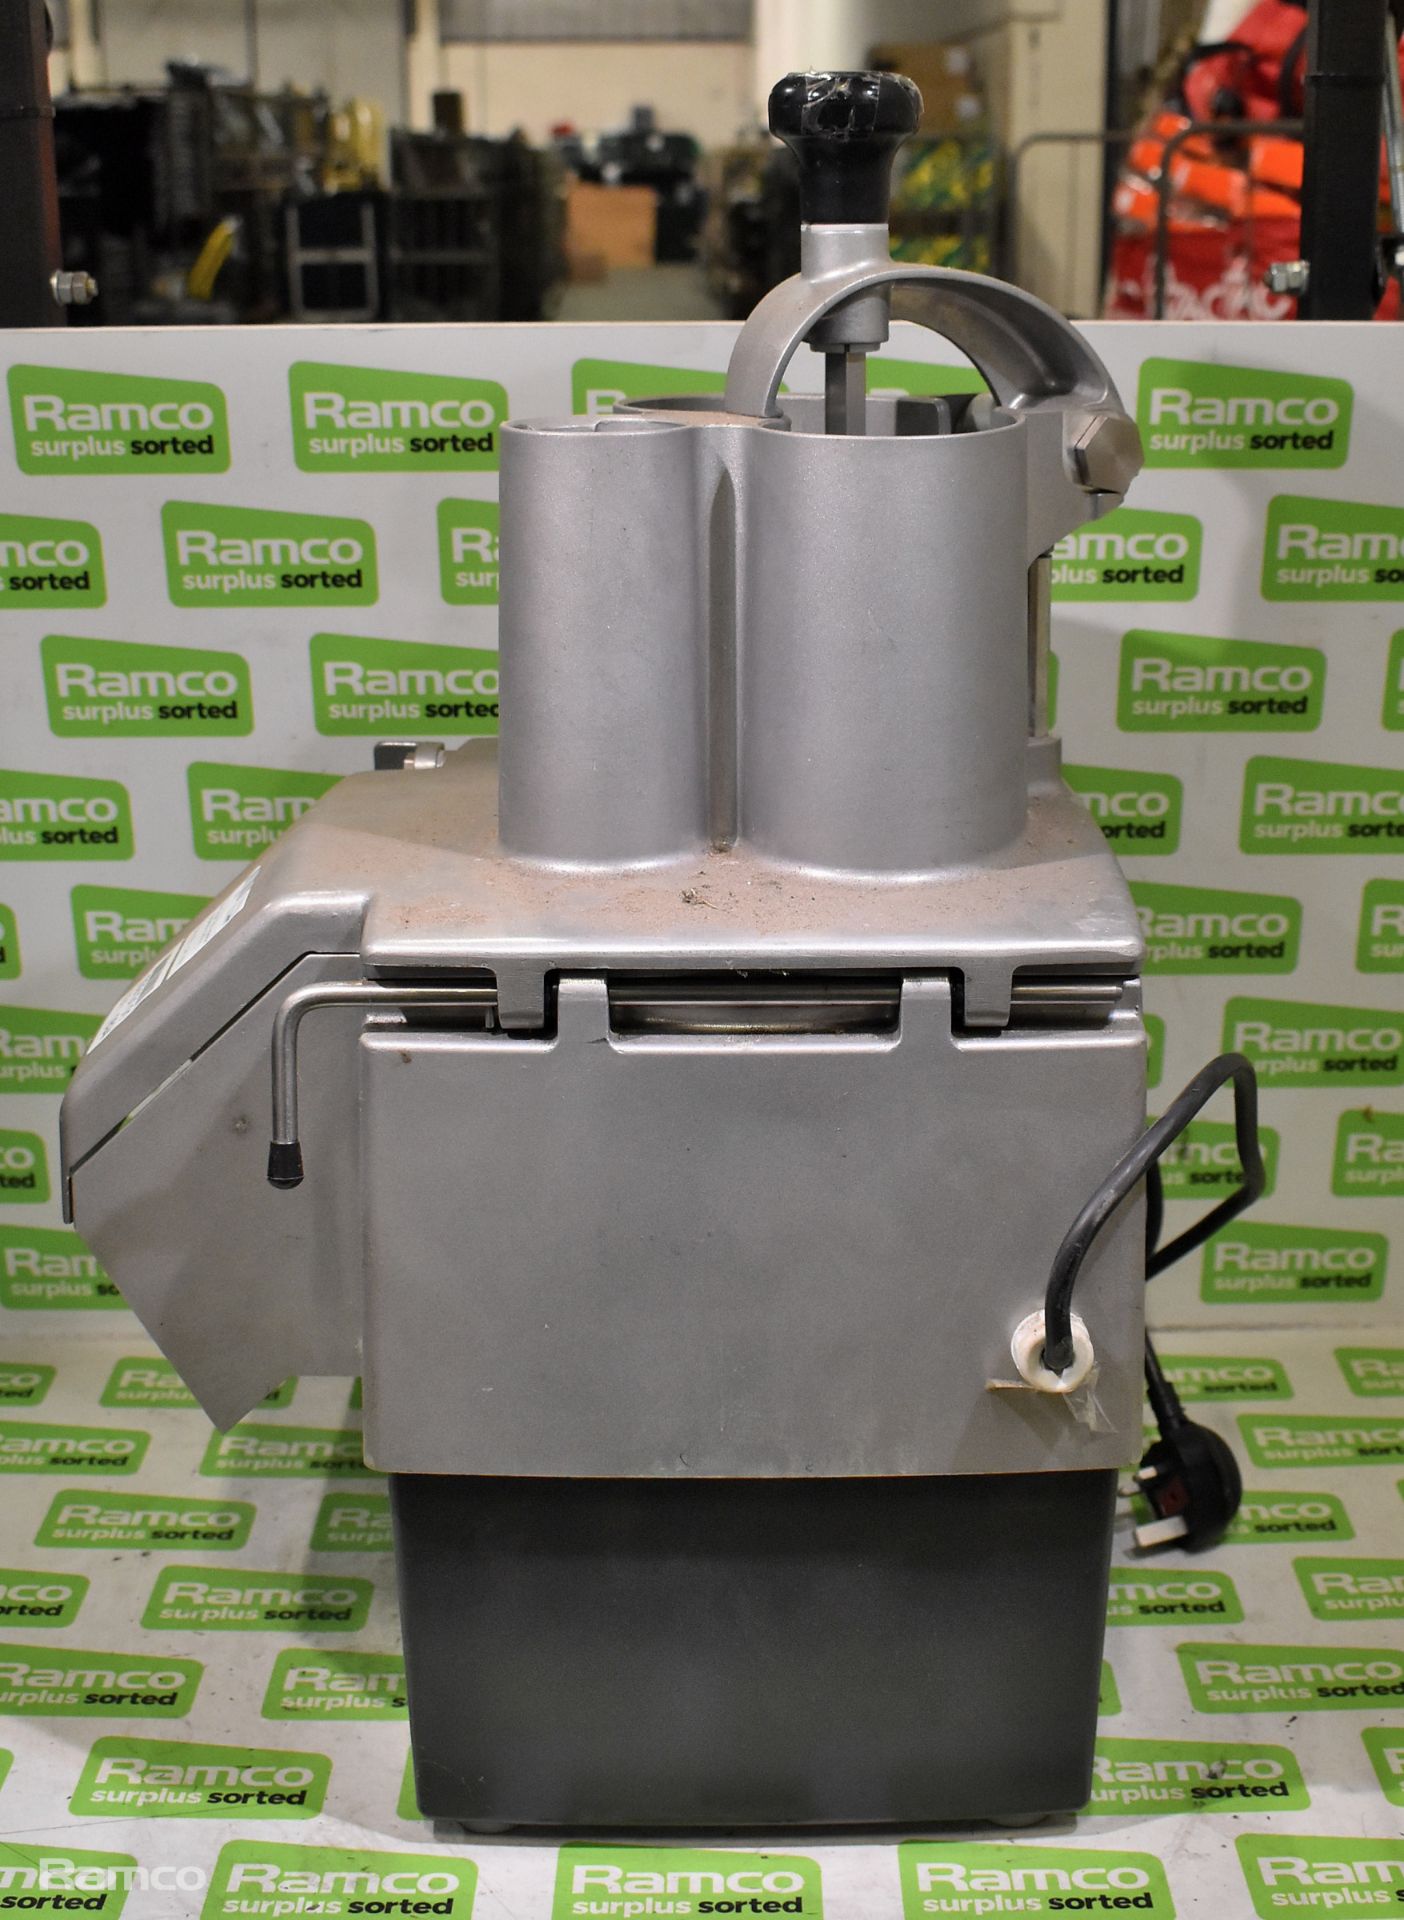 Robot Coupe CL50 vegetable preparation machine - Image 6 of 7